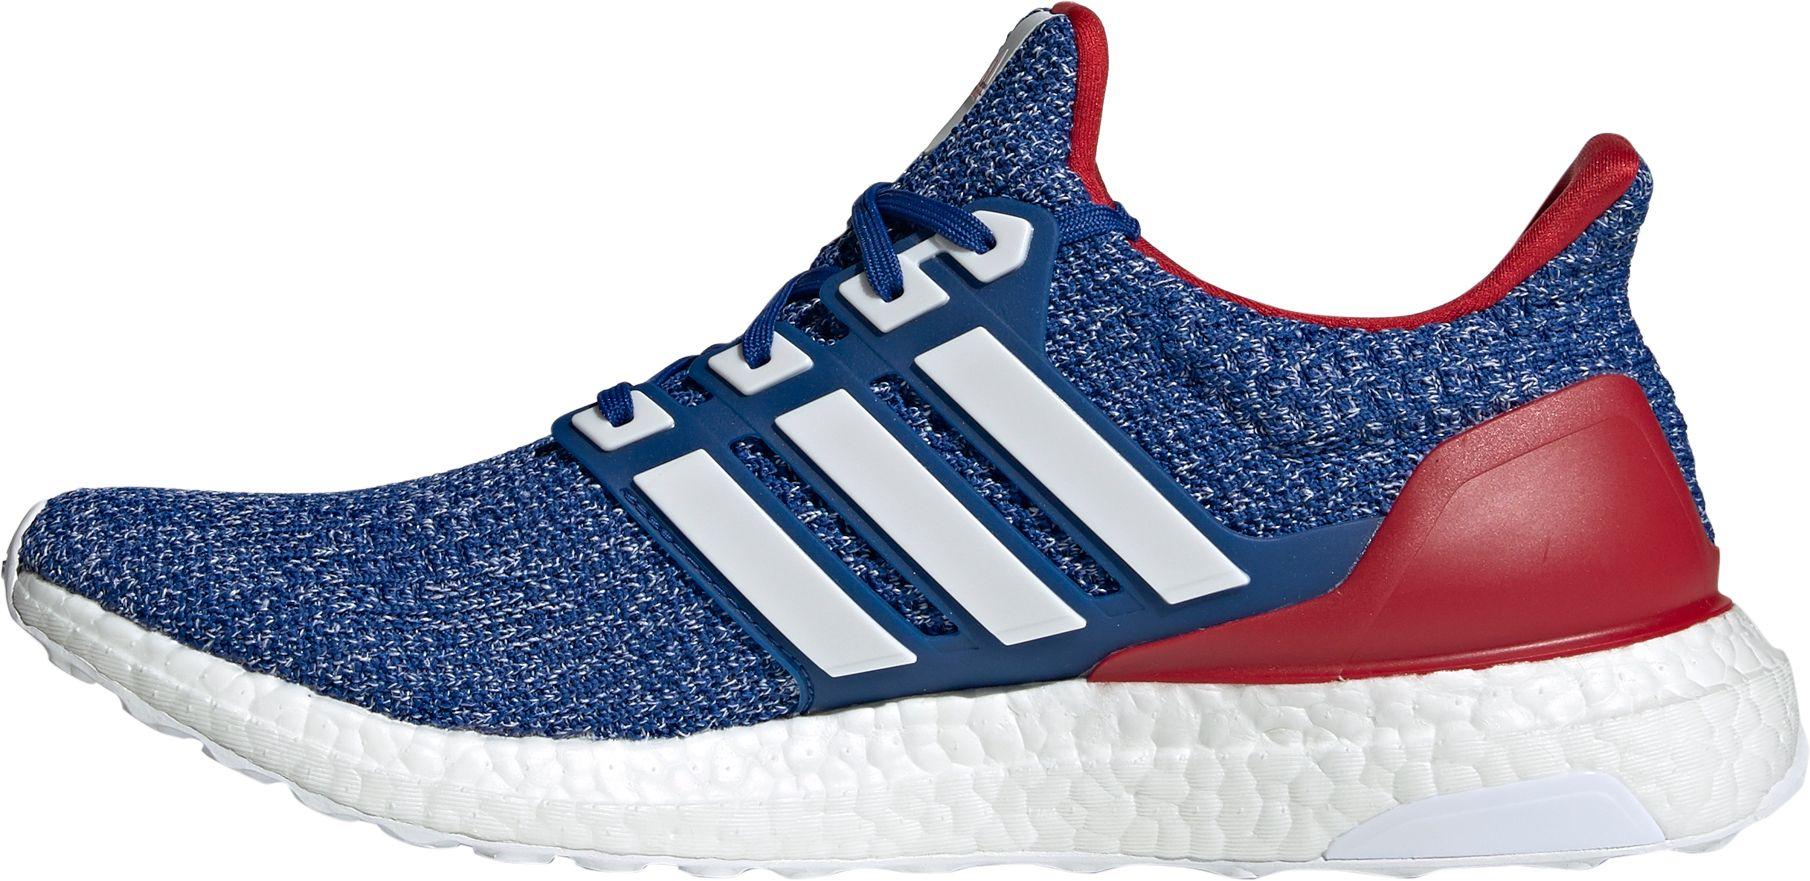 adidas Rubber Kansas Ultraboost Running Shoes in Blue/White (Blue) for ...